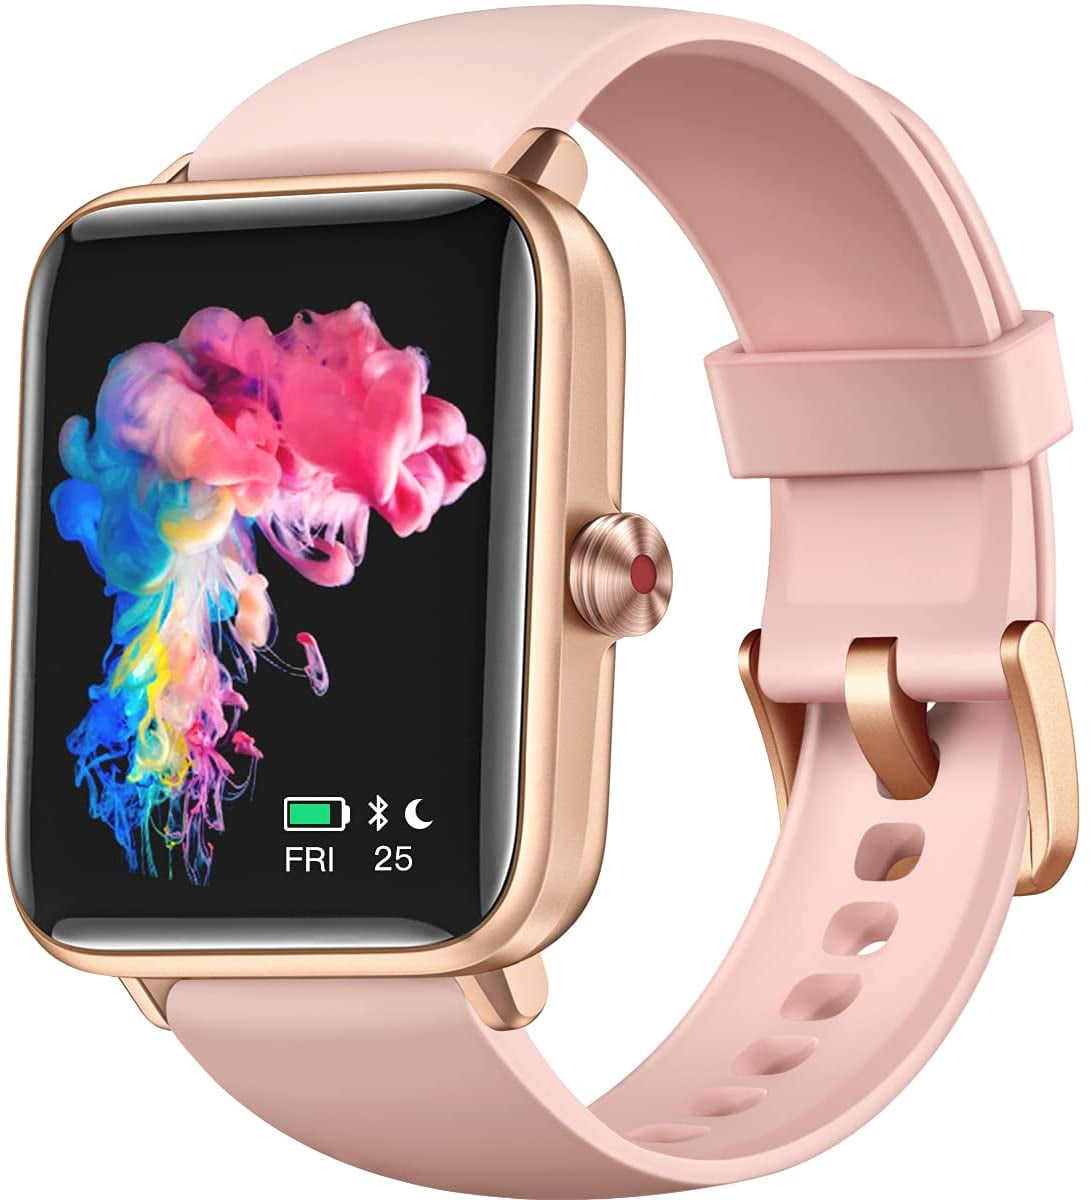 Pink Smartwatch with Heart Rate Monitor